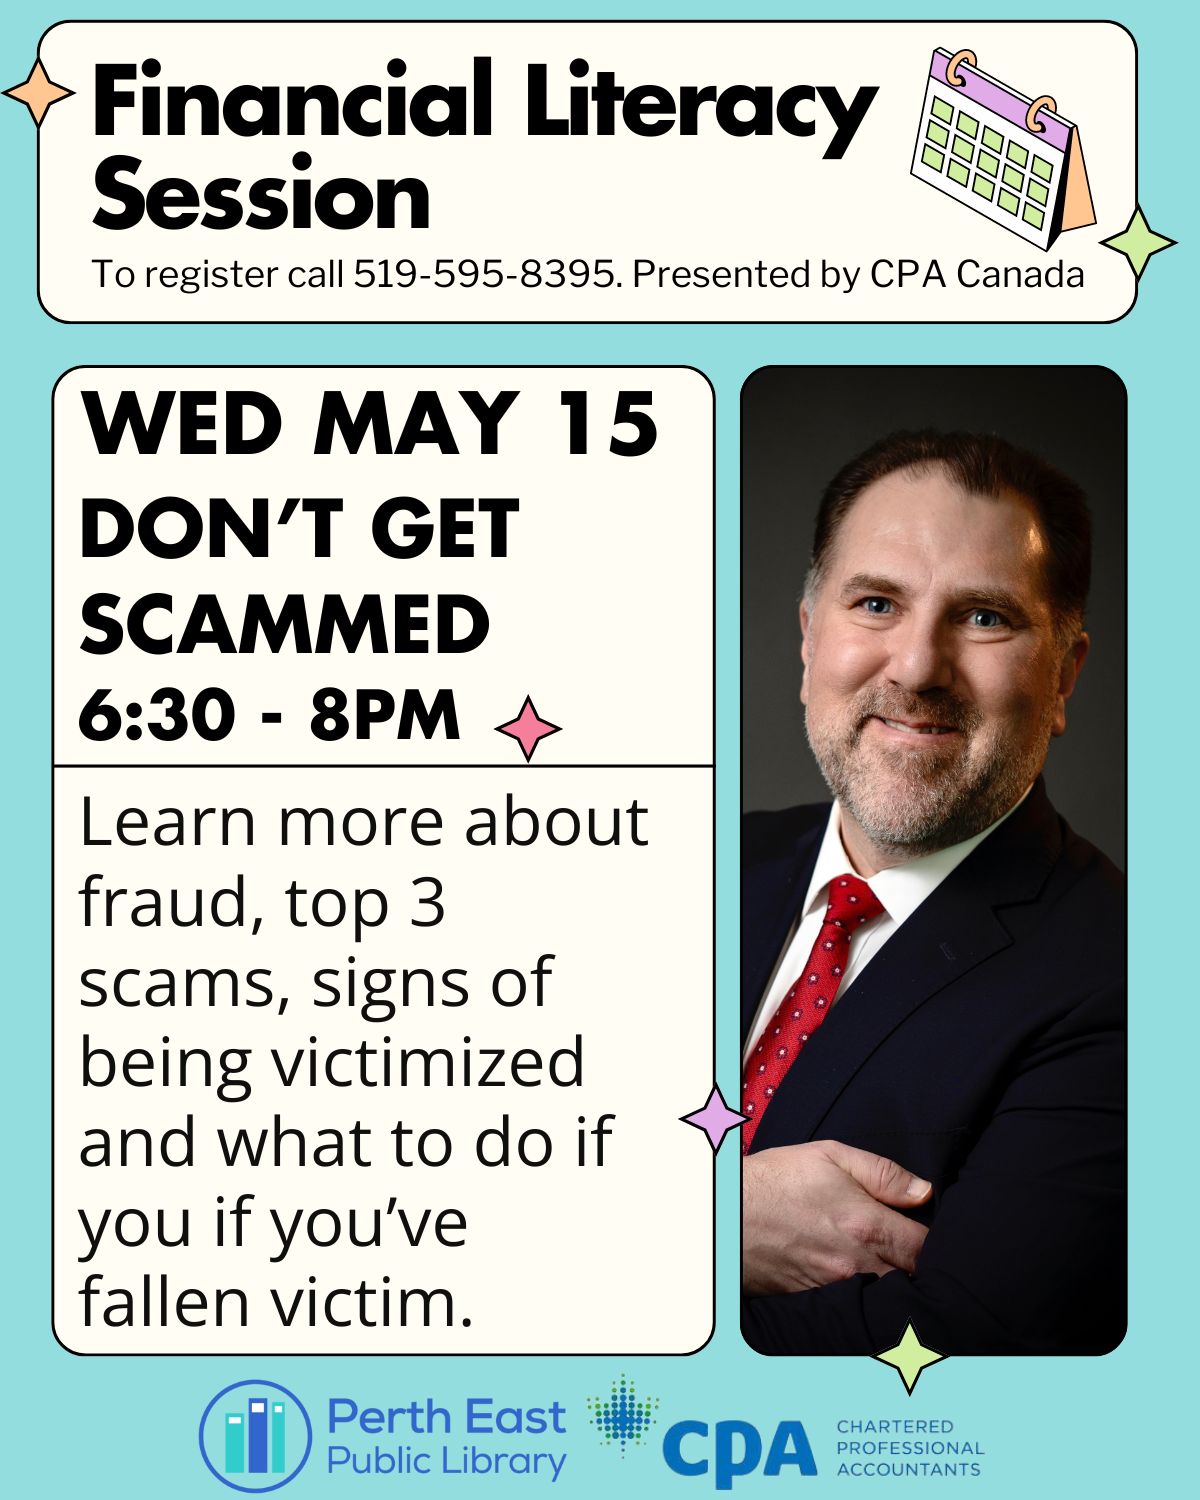 Don't Get Scammed - Wednesday May 15th 6:30-8pm